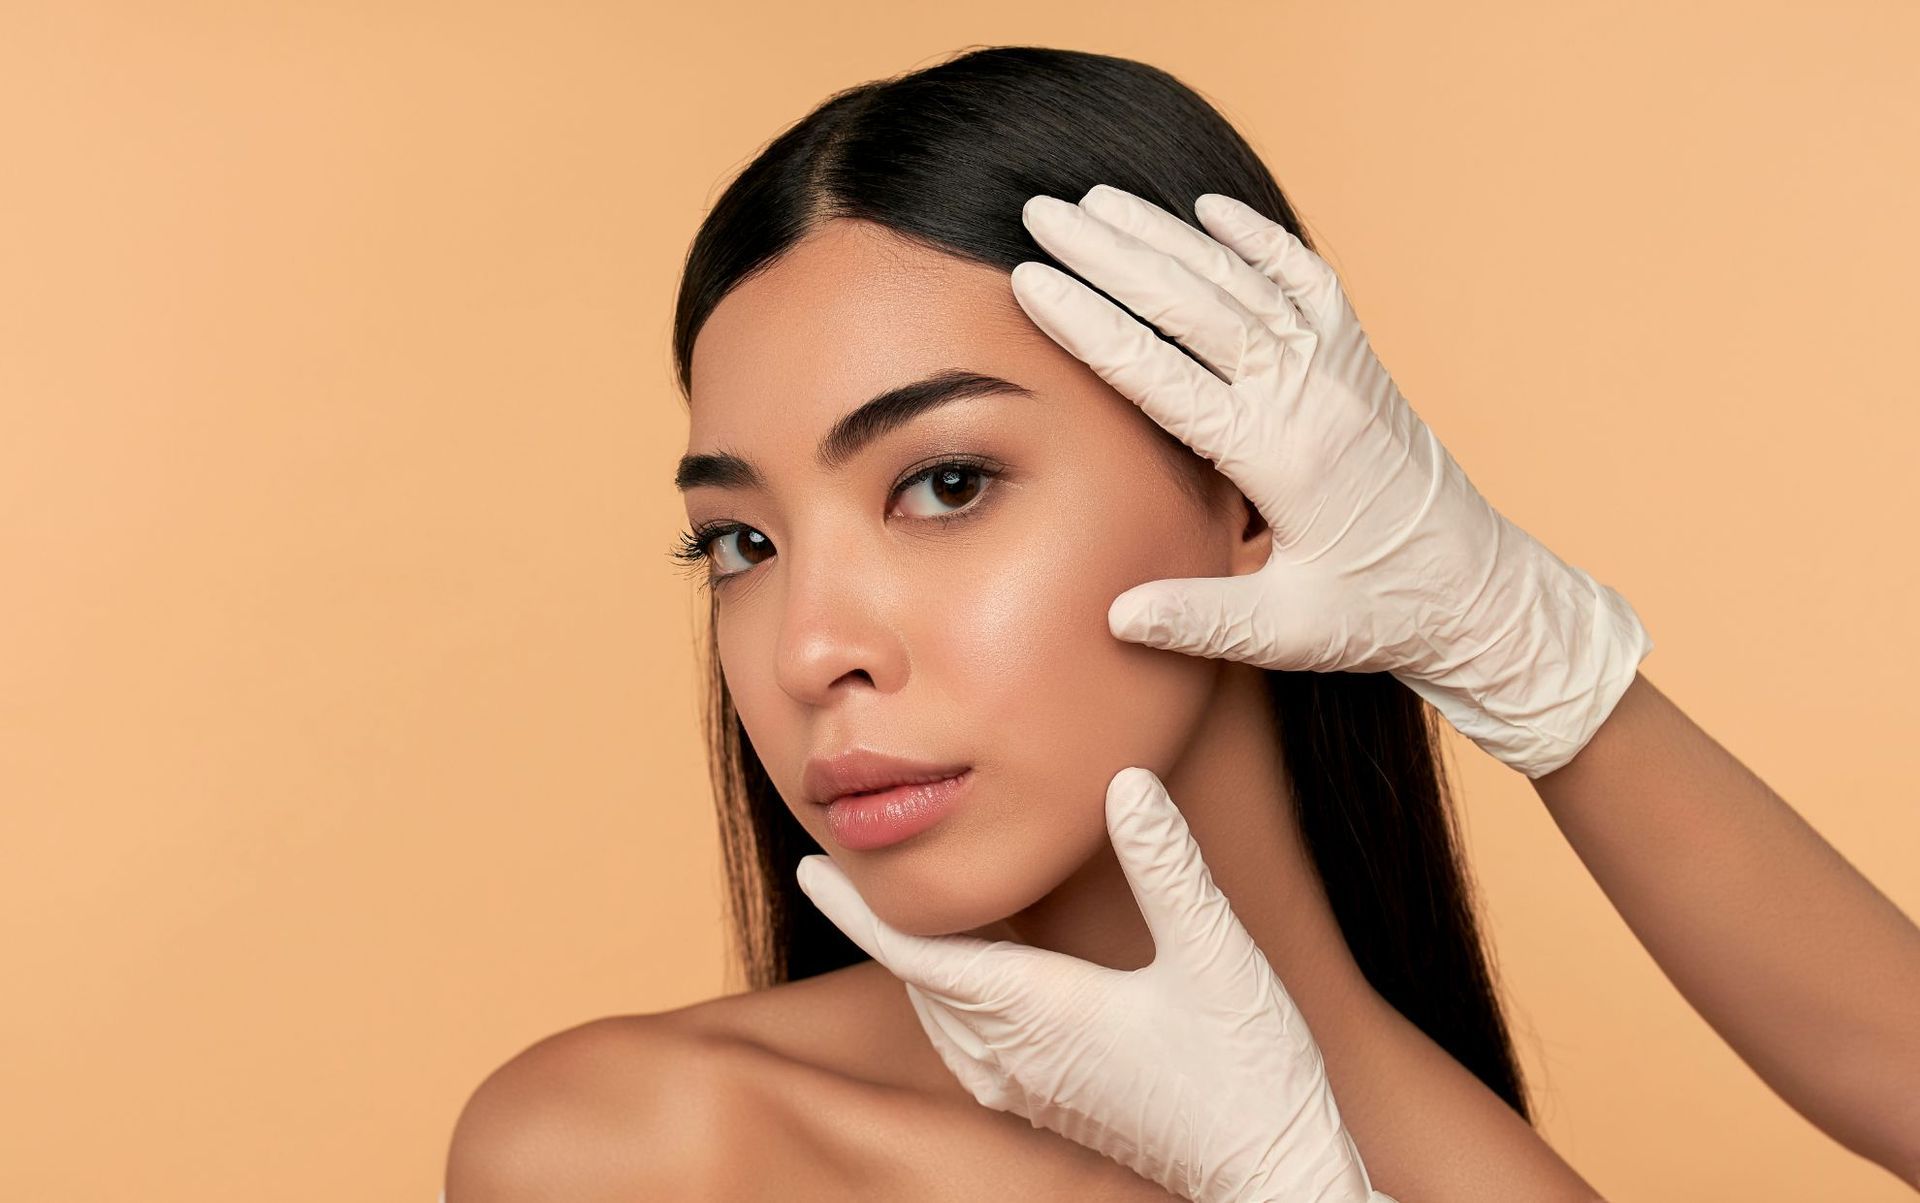 beautiful young woman with doctor's gloved hands on face prepping for aesthetic treatment